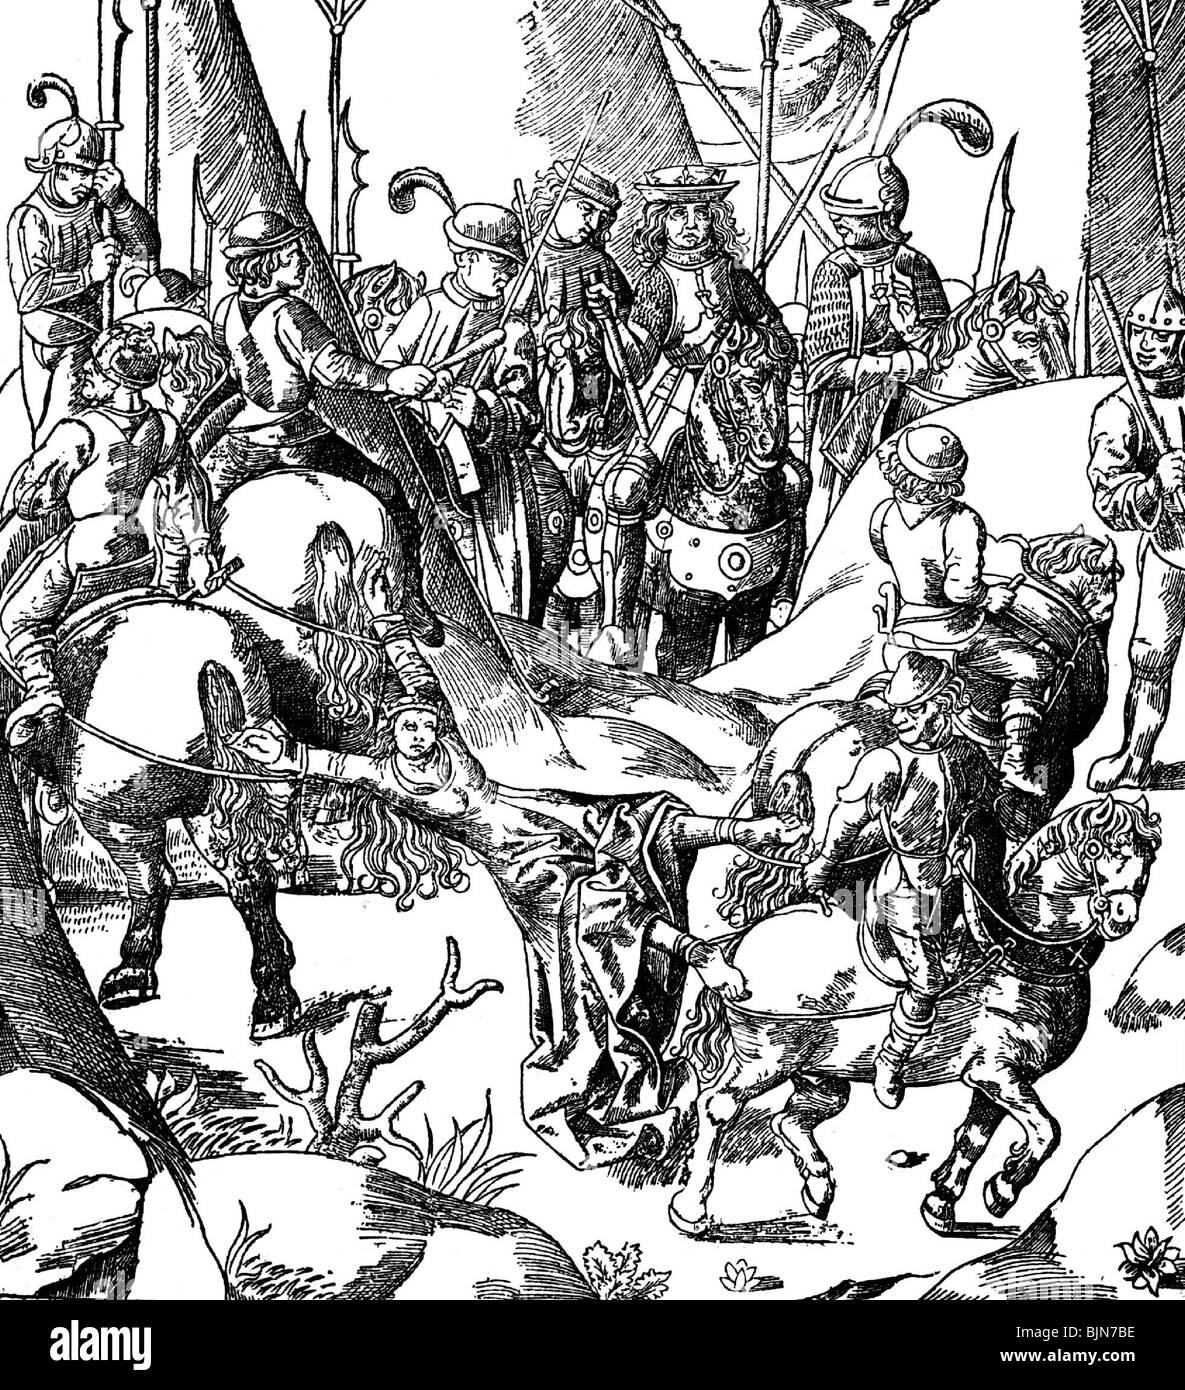 justice, penitentiary system, dismemberment, execution of Brunhilde, the Queen of Franconia, woodcut, 15th century, historic, historical, divide into four parts, capital punishment, death penalty, horses, woman, offender, delinquent, offenders, delinquents, carrying out, executions, medieval times, Middle Ages, people, women, female, Stock Photo